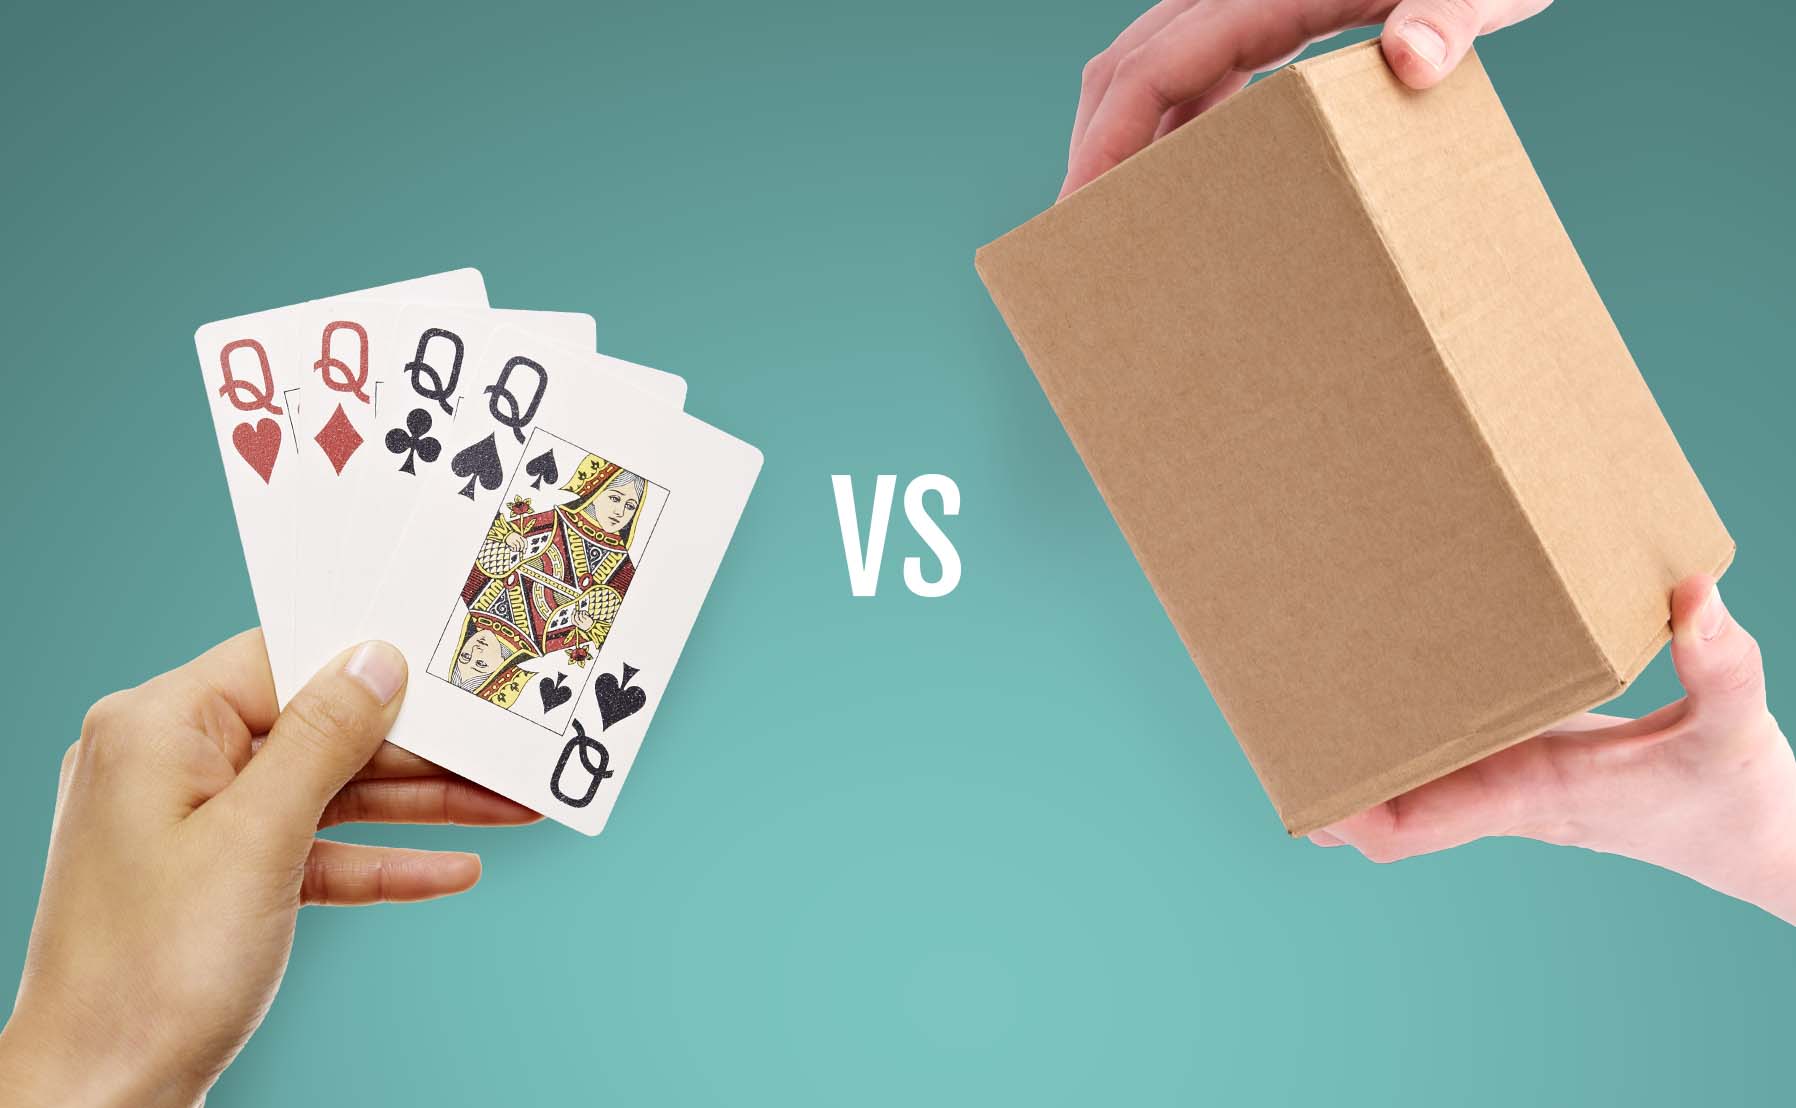 Cardboard vs Corrugated Board: What's the Difference?